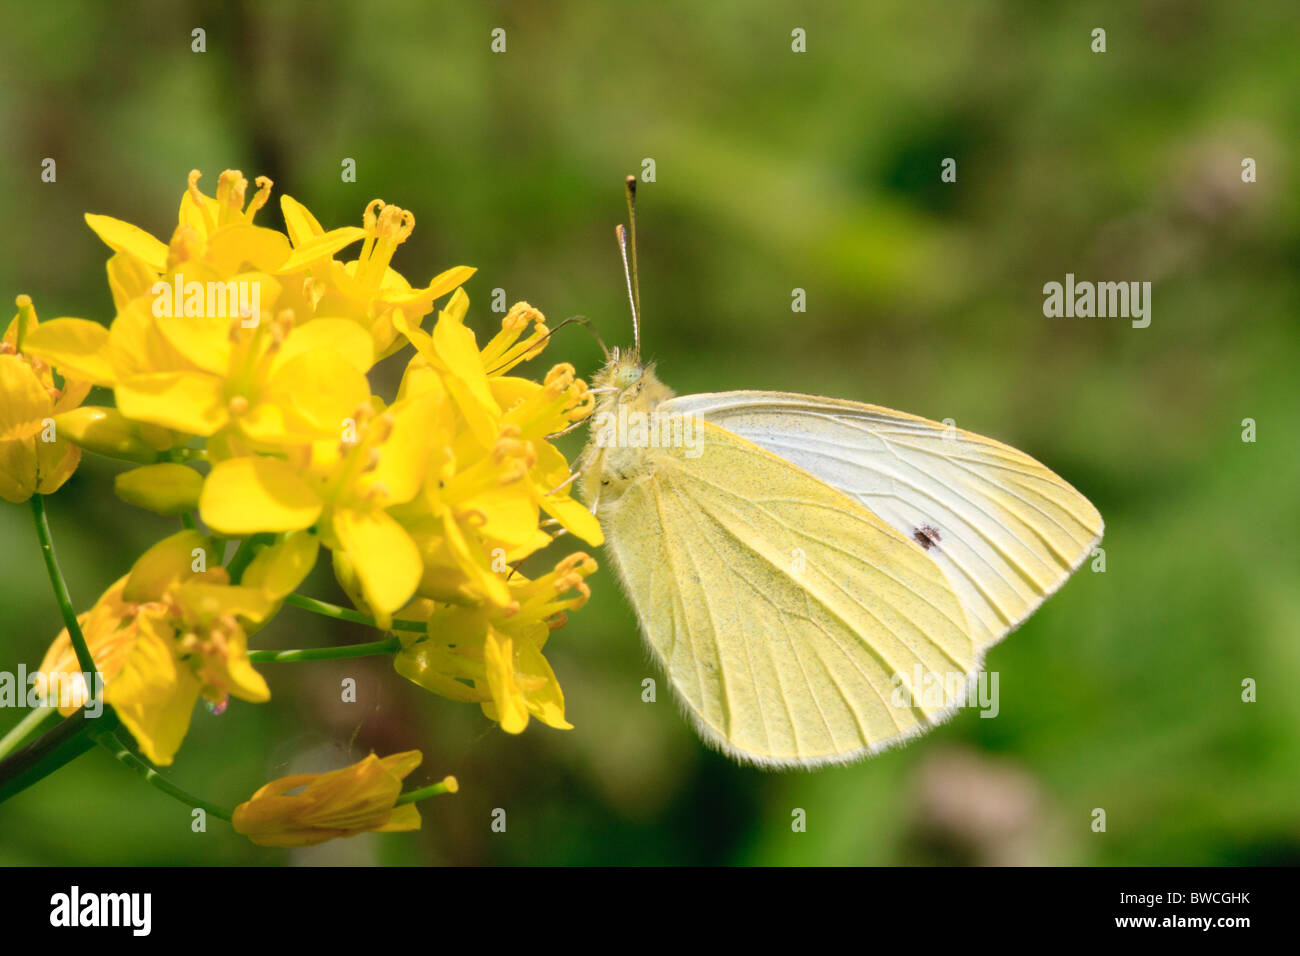 Cabbage white butterfly feeding on yellow wild flower Stock Photo